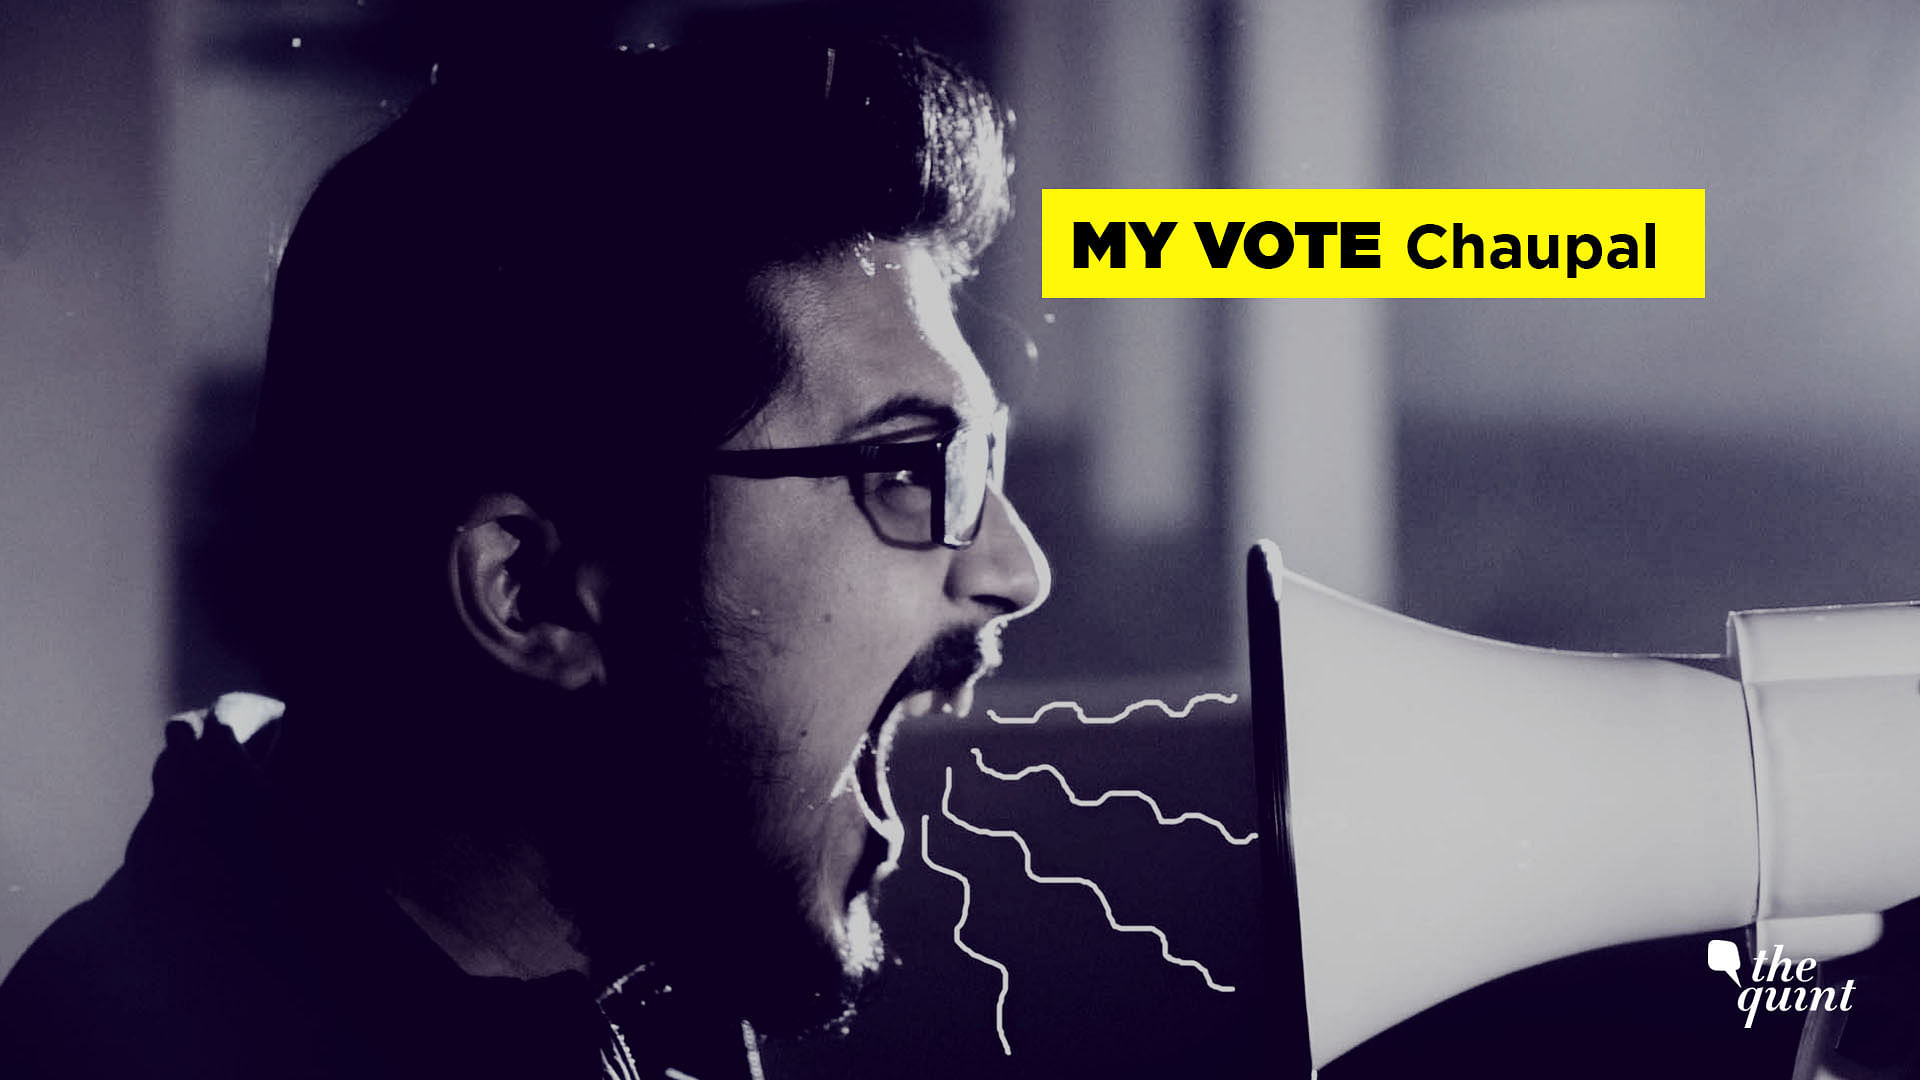 Through ‘My Vote Chaupal’, the voters can speak about the issues that matter to them.&nbsp;